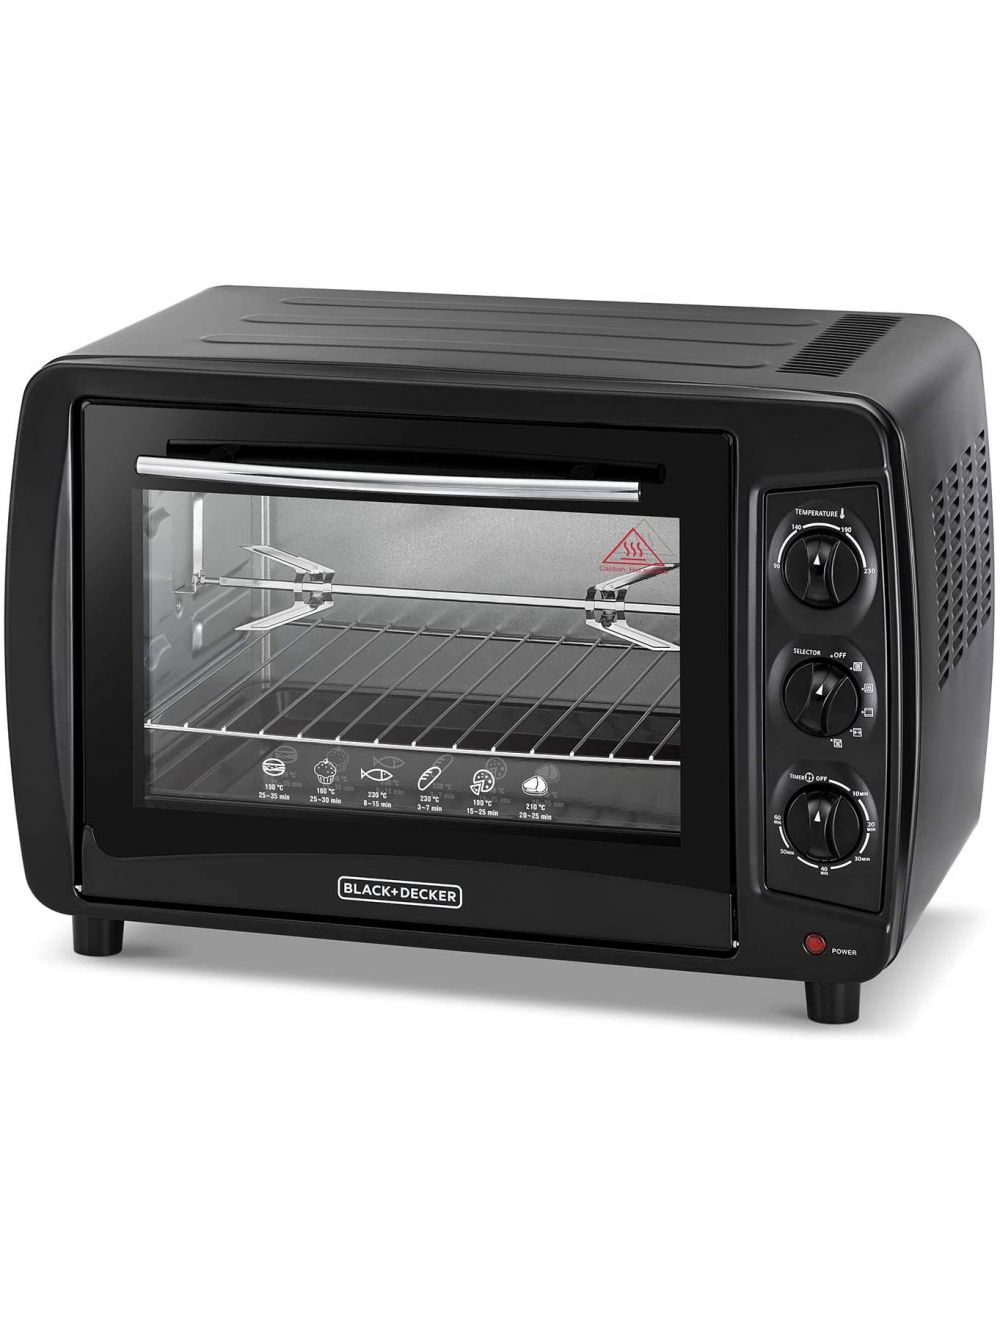 35L Double Glass Toaster Oven-TRO35RDG-B5